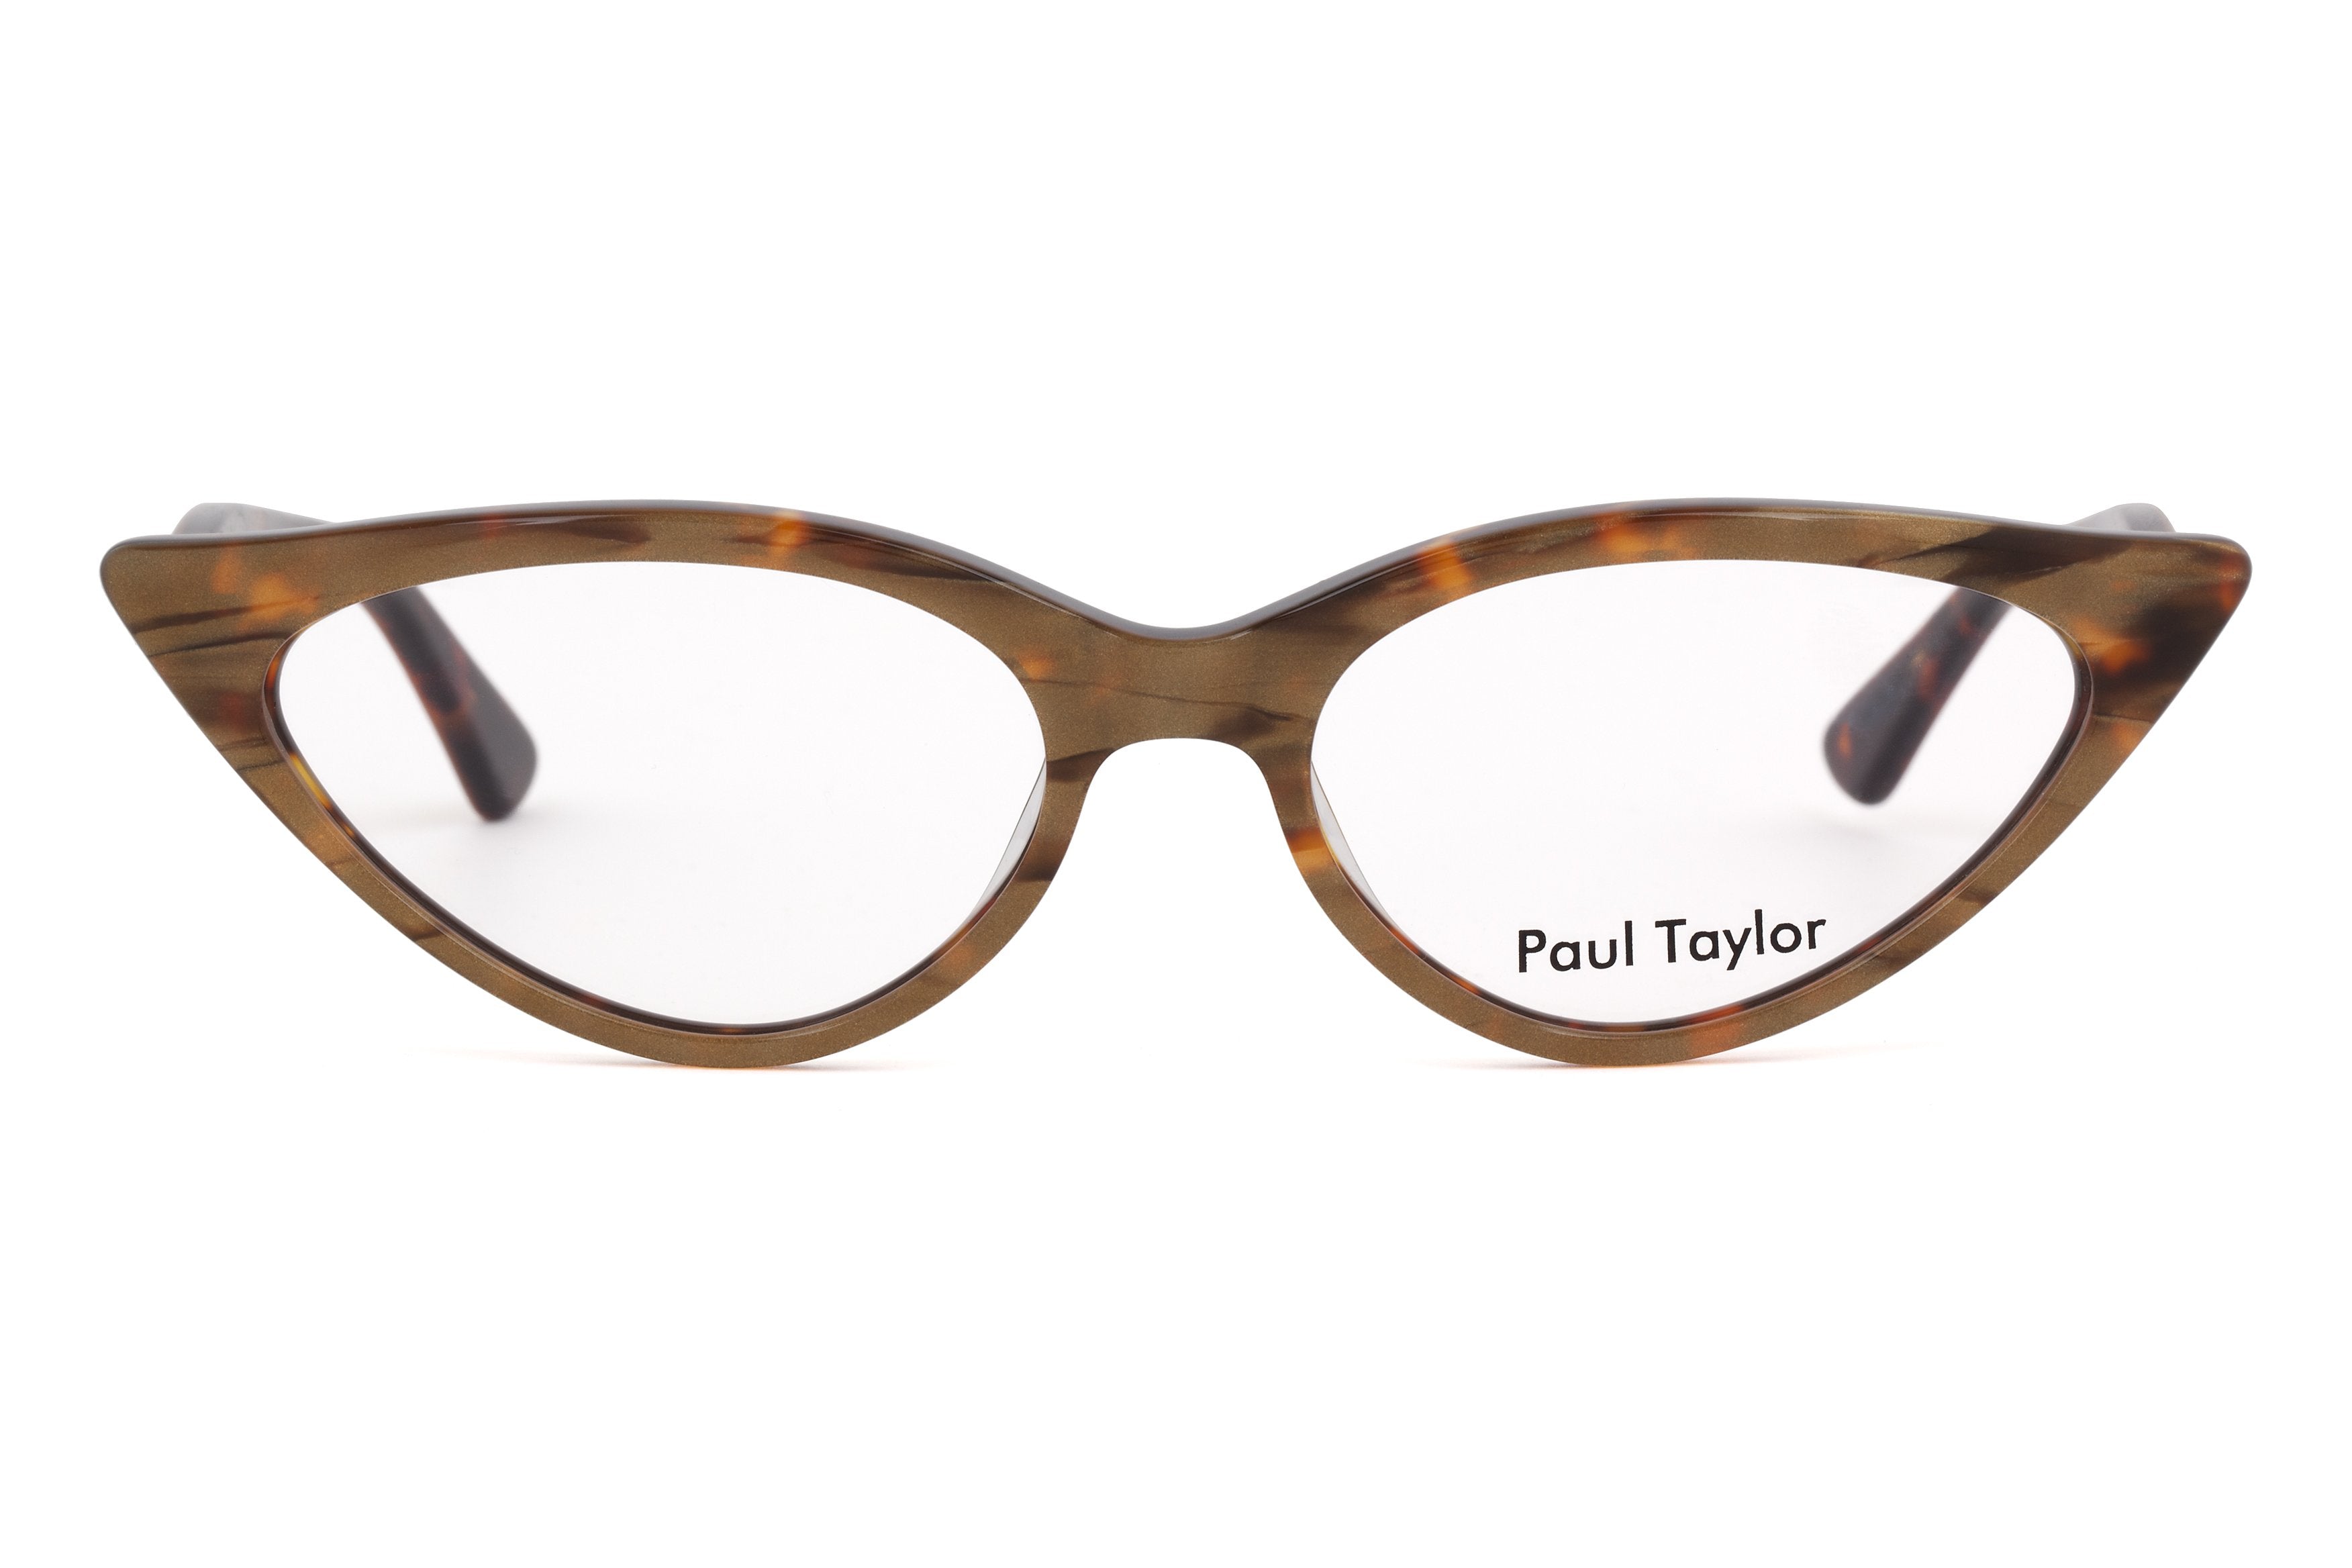  M001 Optical Glasses AK4 Golden Marble FRONT with Golden Marble & Tortoiseshell Underlay TEMPLES - Paul Taylor Eyewear